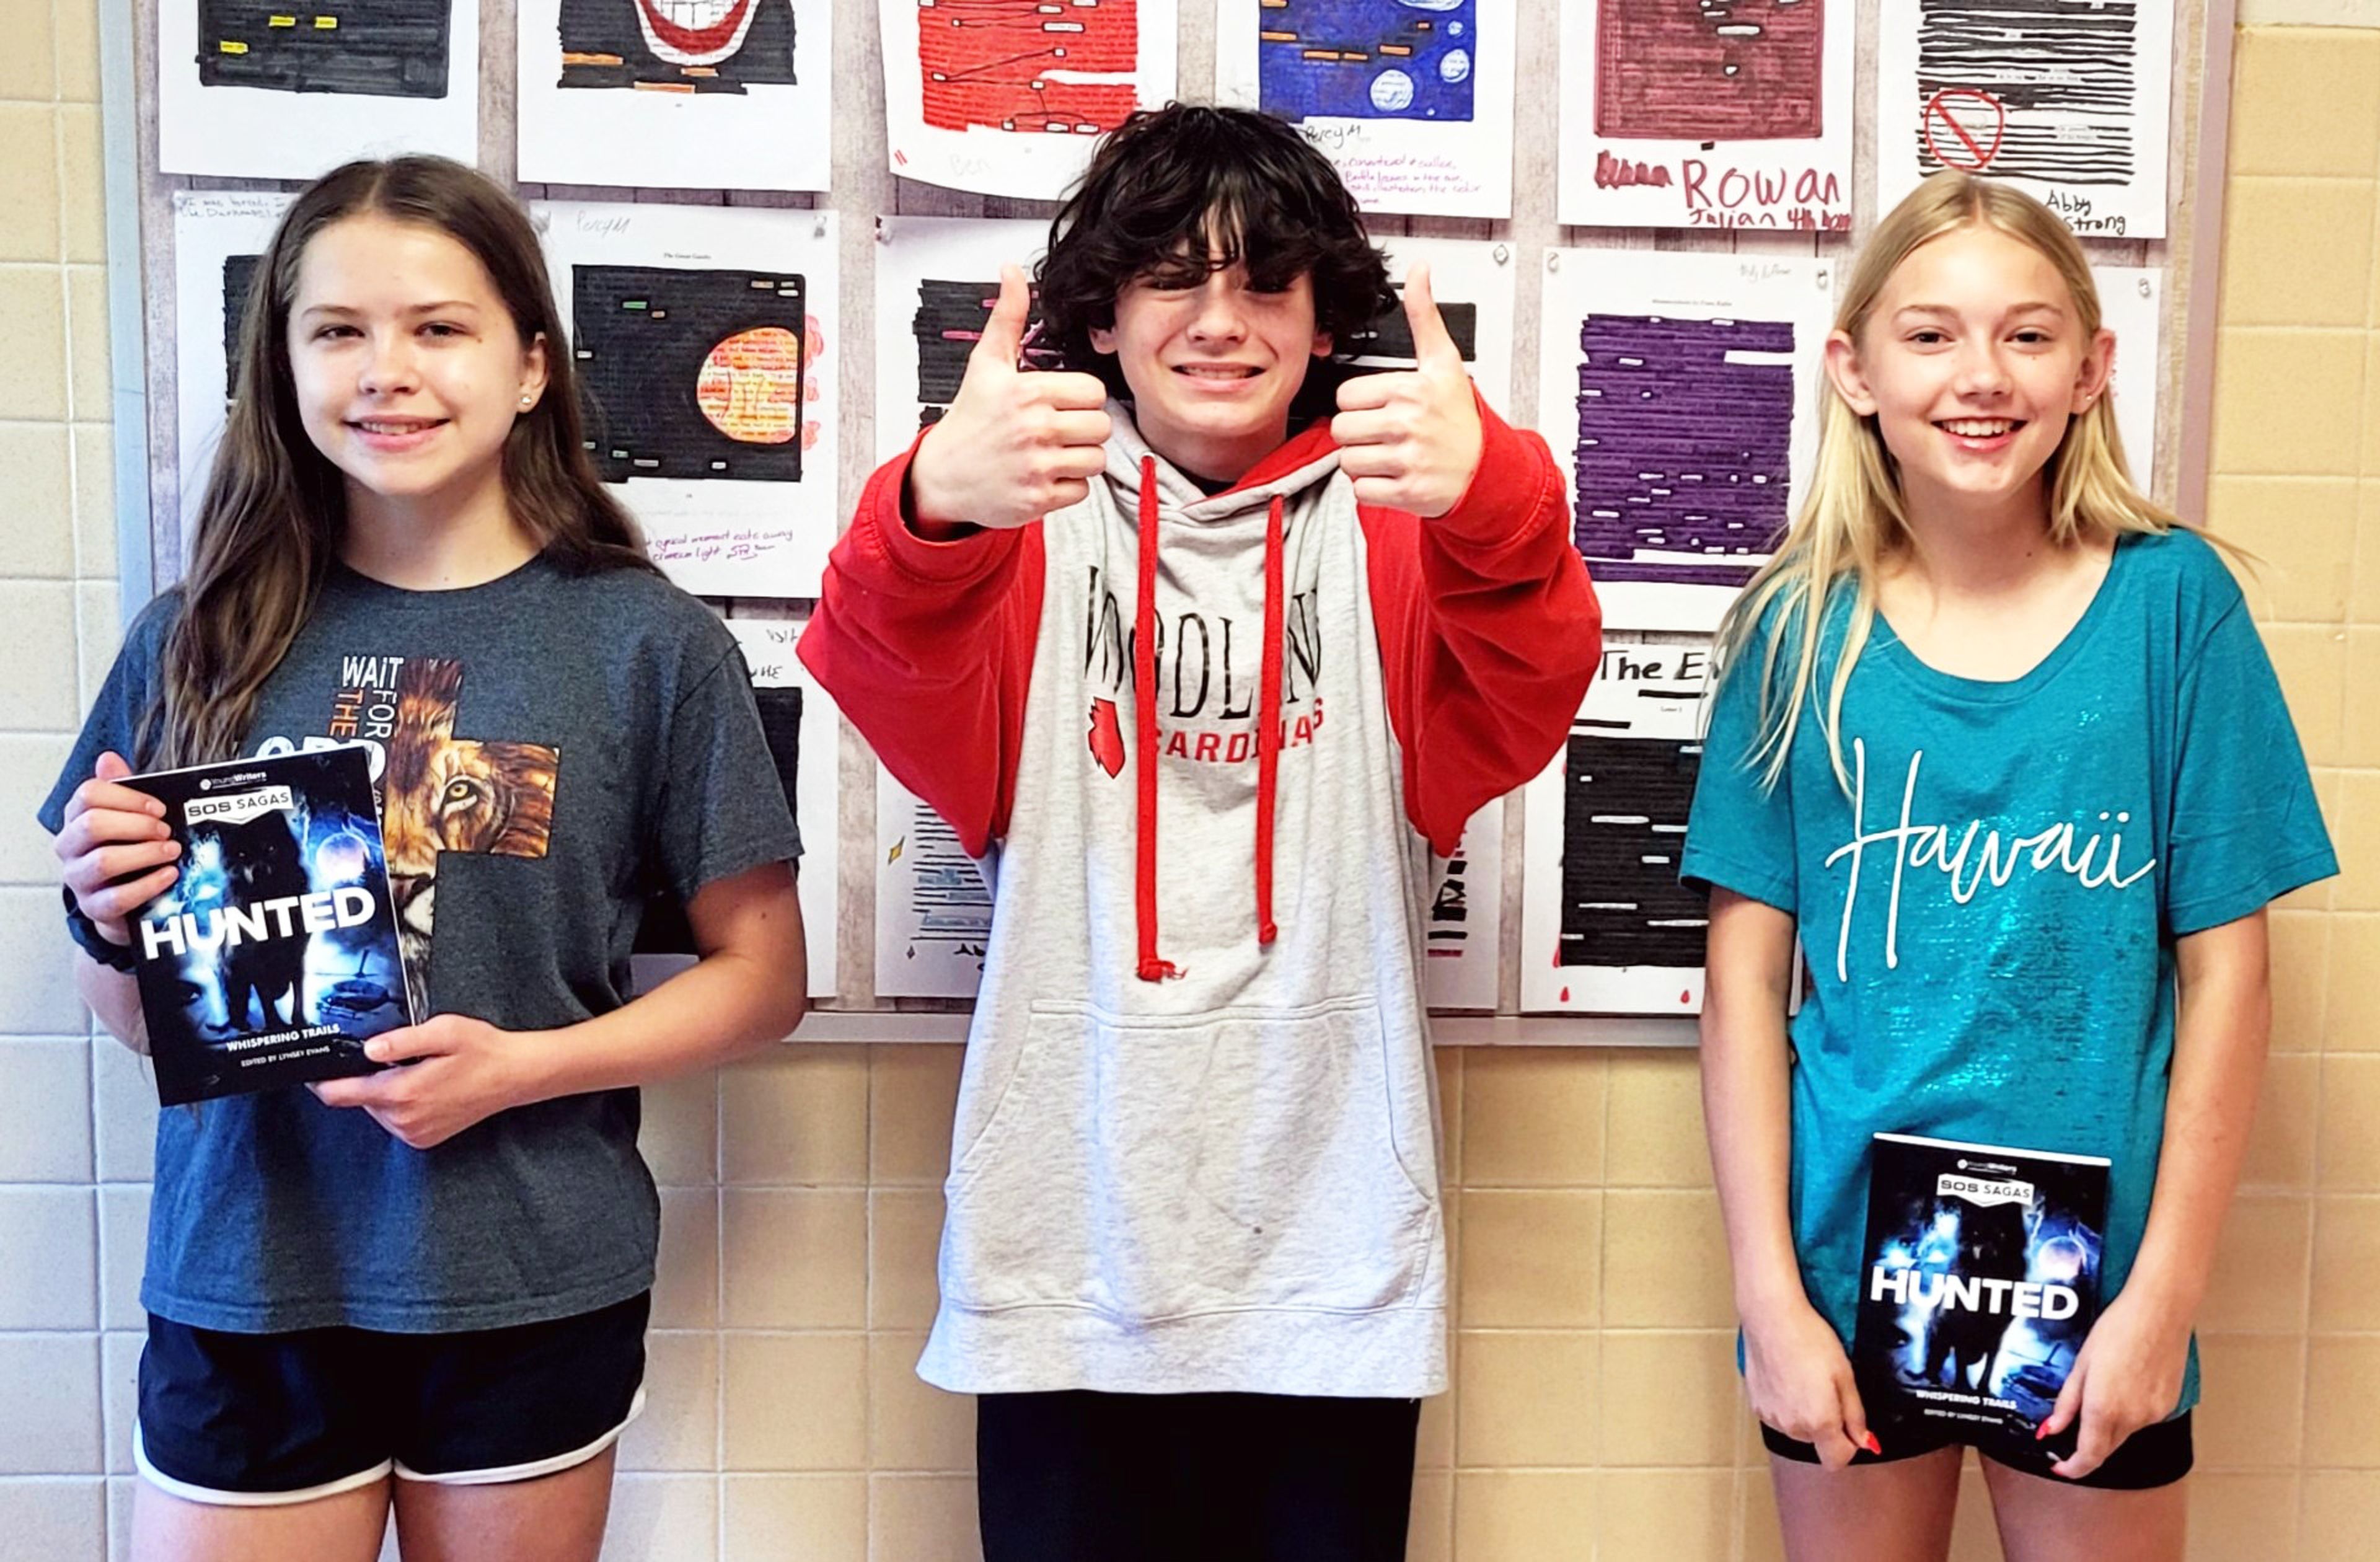 Woodland seventh graders Karissa Green, River Fain and Alexsa VanGennip are happy to be published authors. Their work was published in the Young Writers book, ‘SOS Sagas: Hunted.’